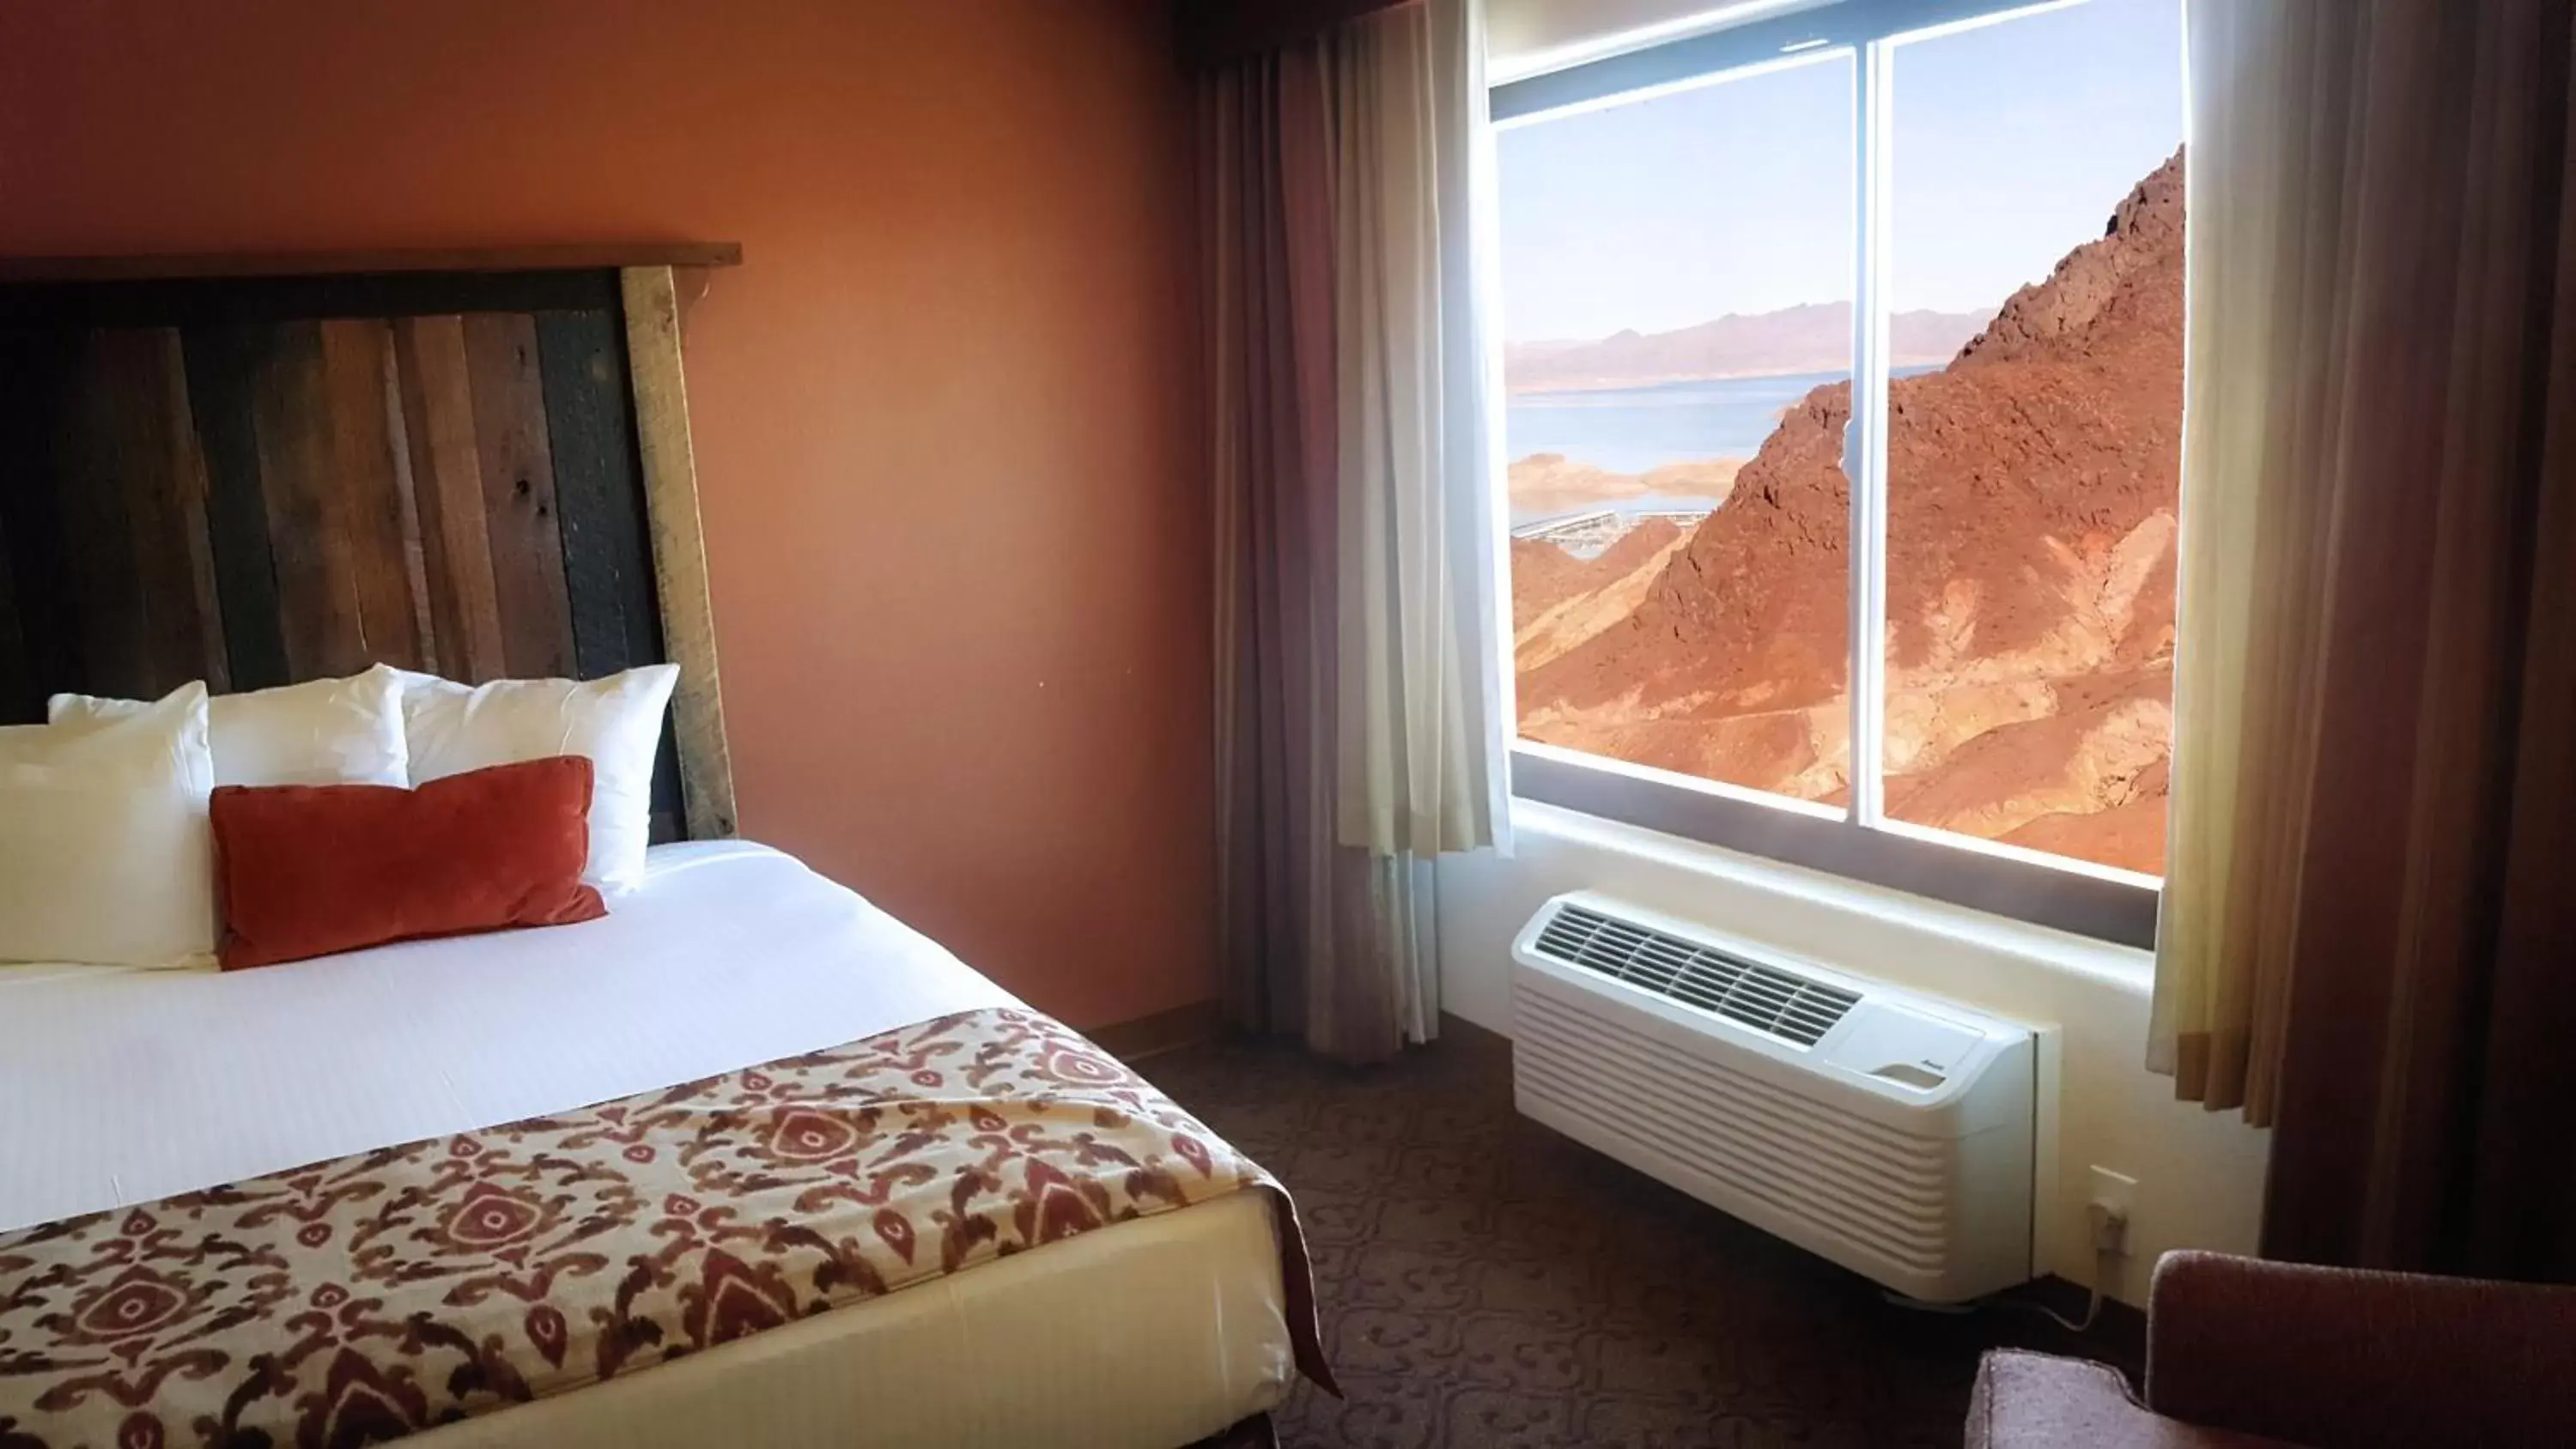 Lake view, Bed in Hoover Dam Lodge